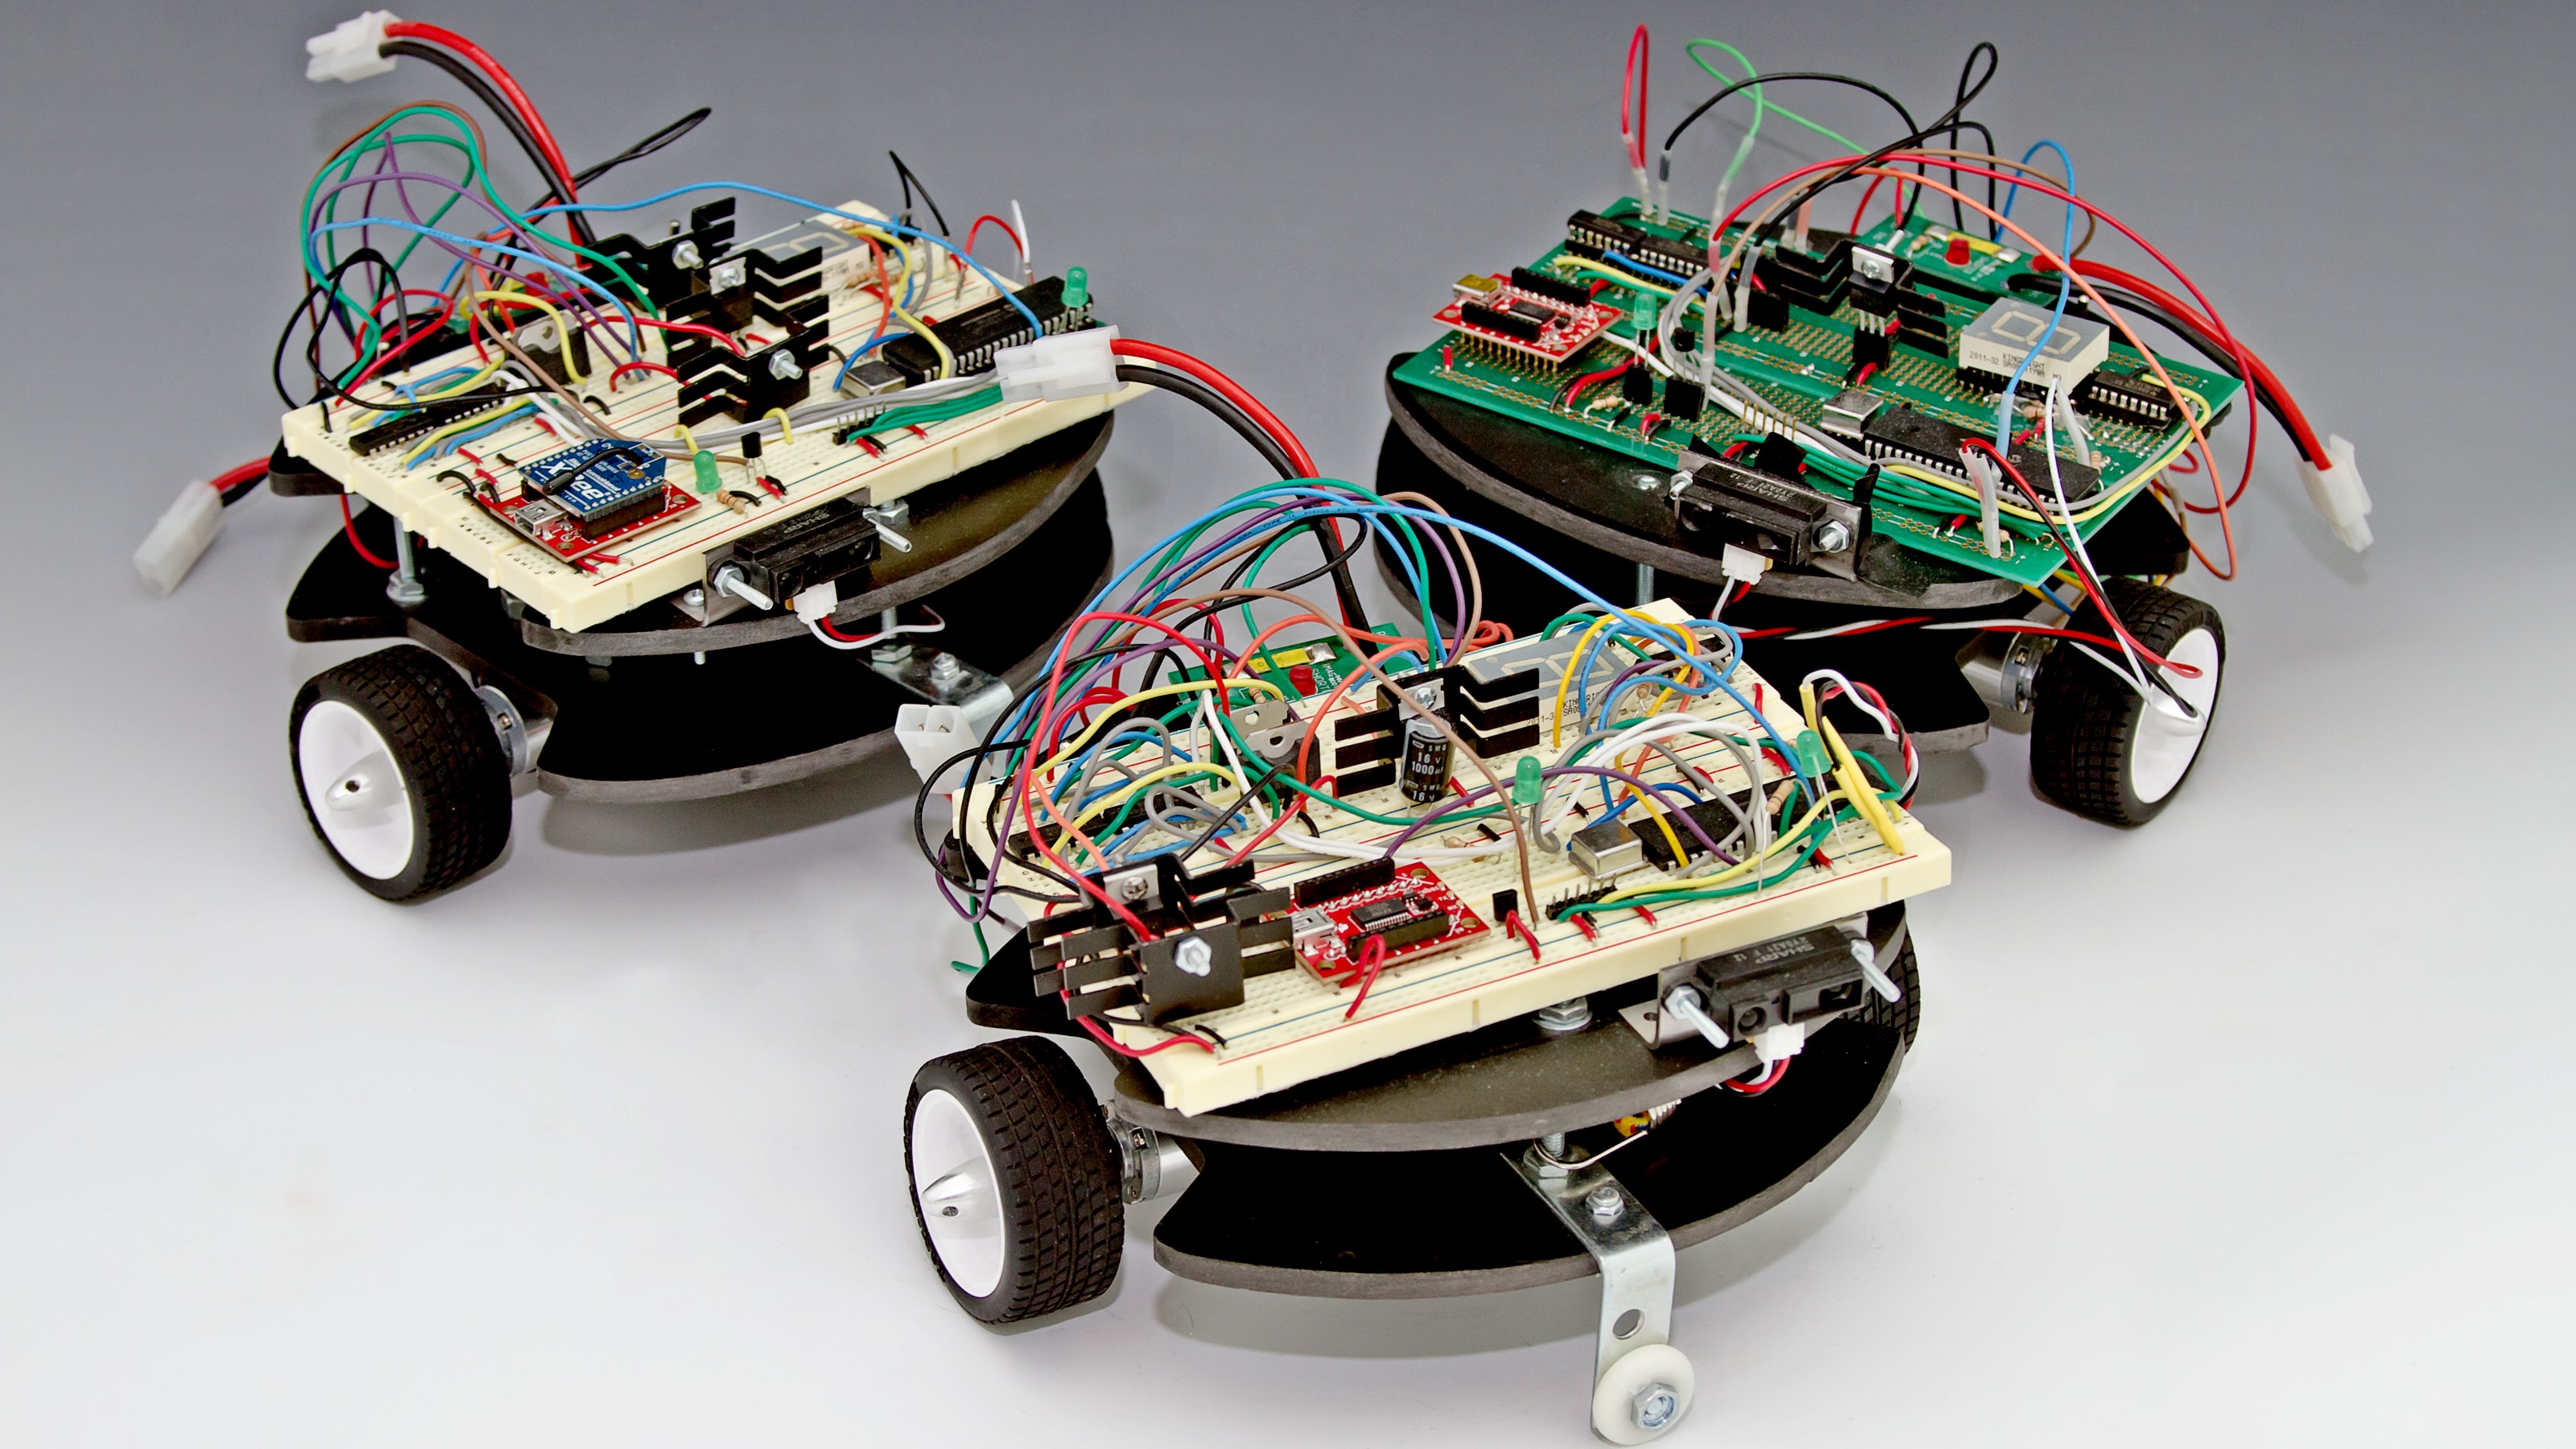 Three square robots with rounded fronts, black and white wheels and exposed circuitry.